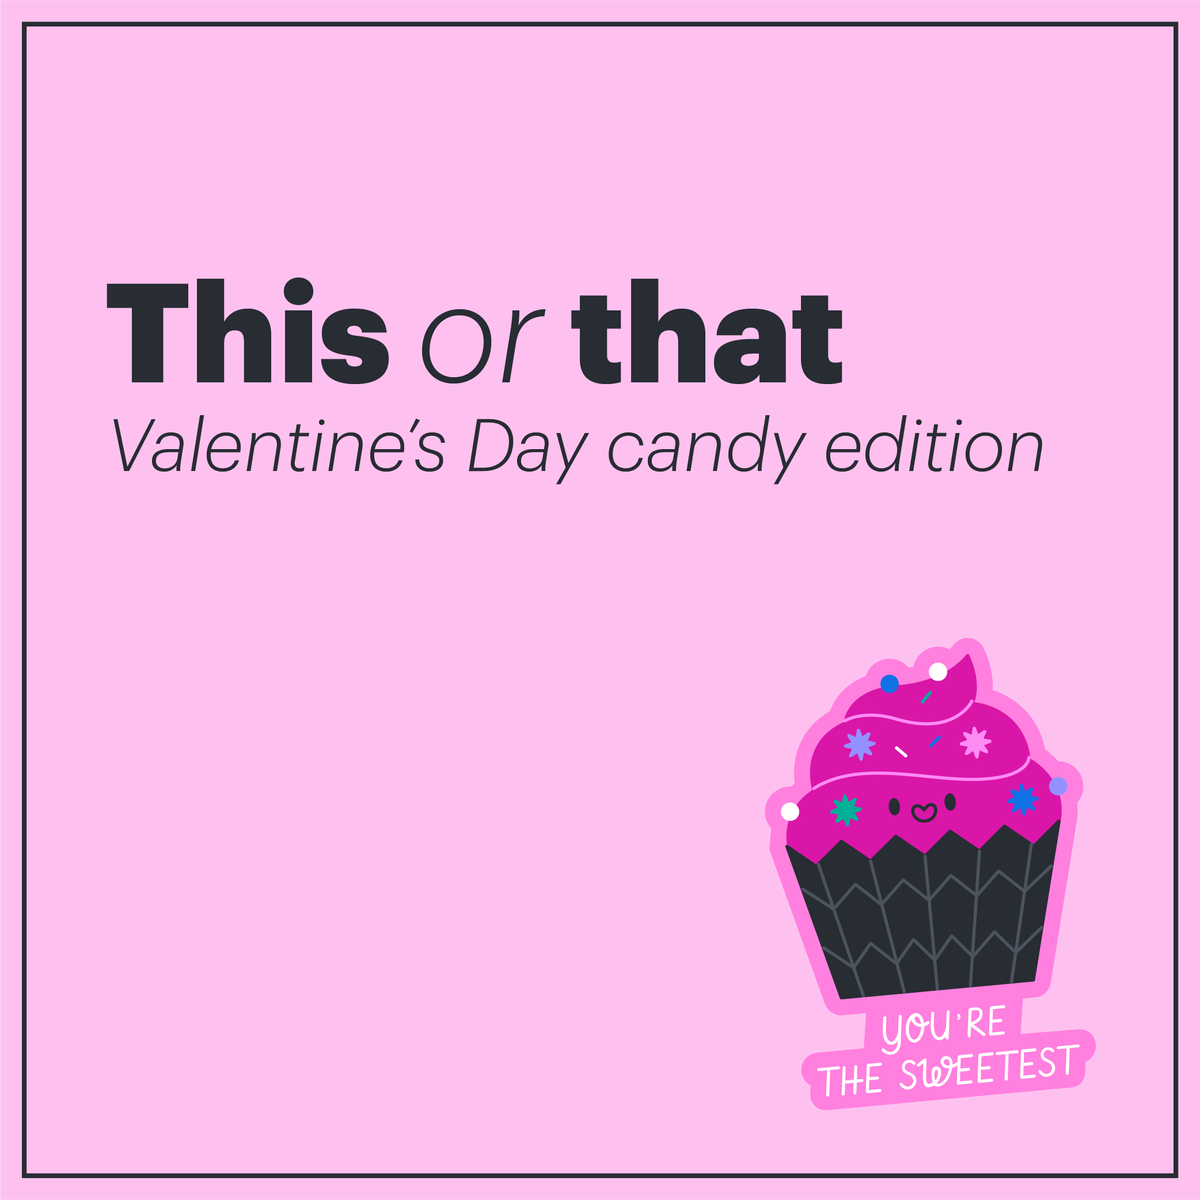 Valentine's Day Candy Showdown! Sweethearts or Chocolate? 🍬🍫 Cast your vote in our Visual Activity! 🔴 tinyurl.com/mwp2fcvv Share the love and see what your friends prefer! #ValentinesDay #CandyShowdown